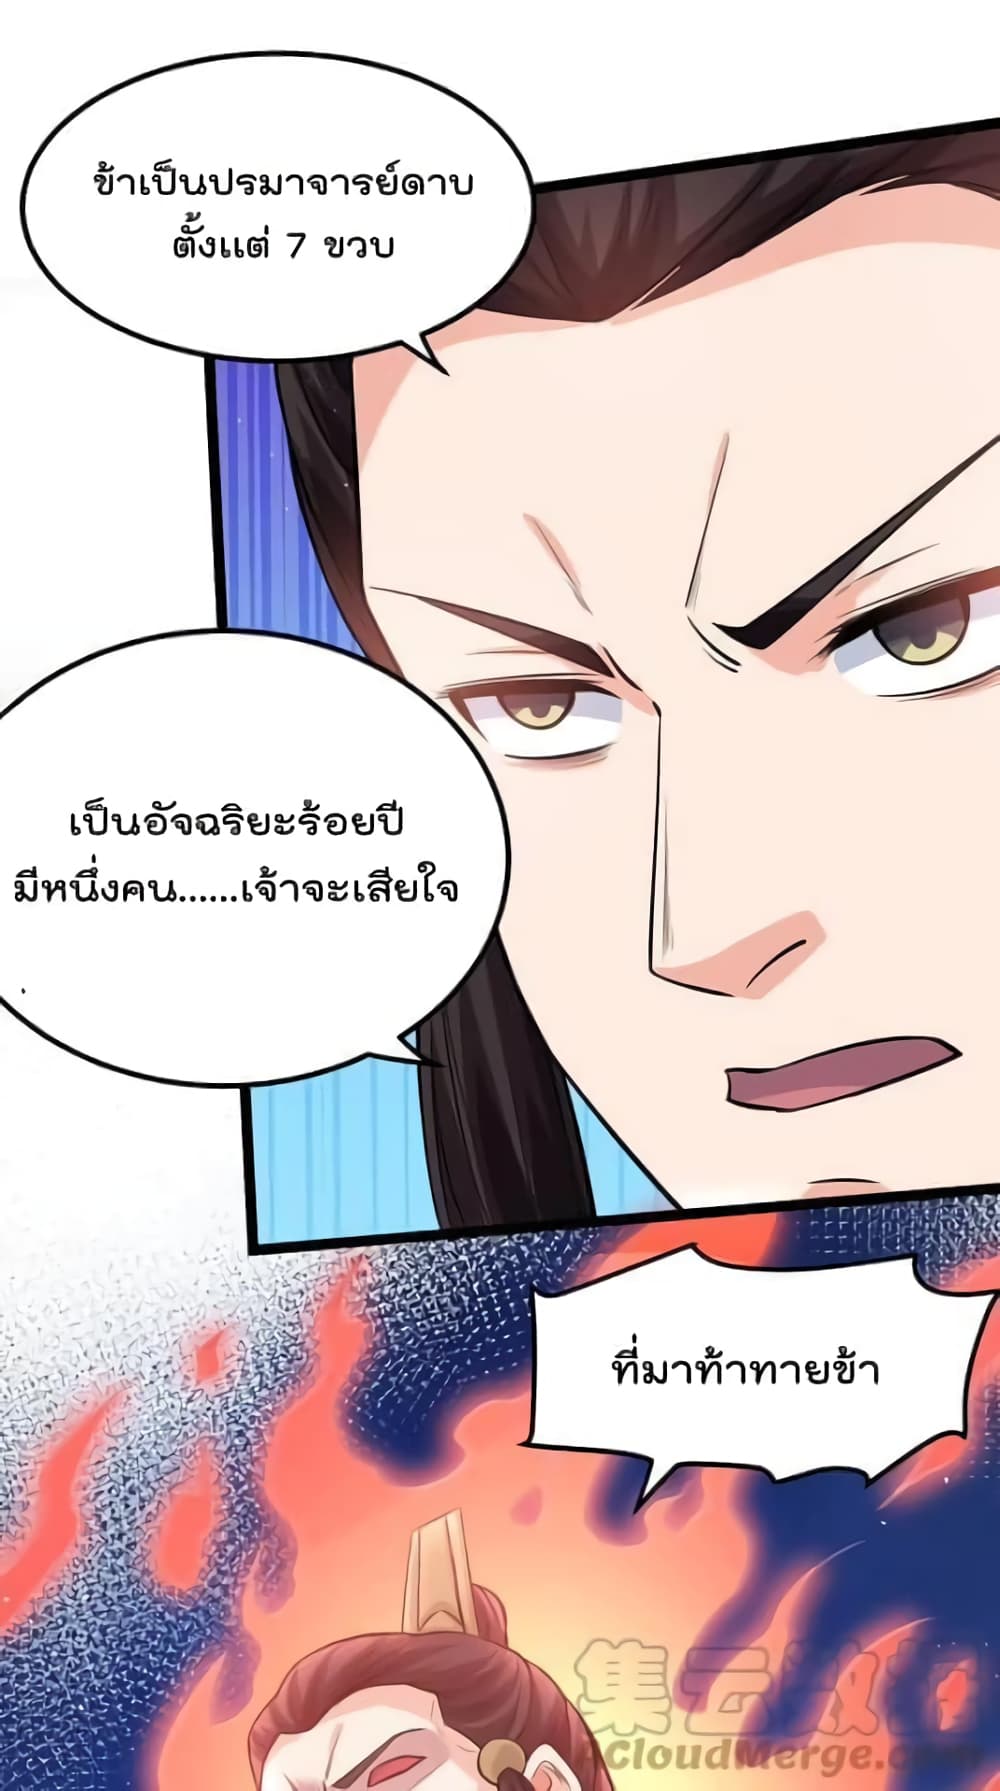 Godsian Masian from Another World ตอนที่ 115 (21)